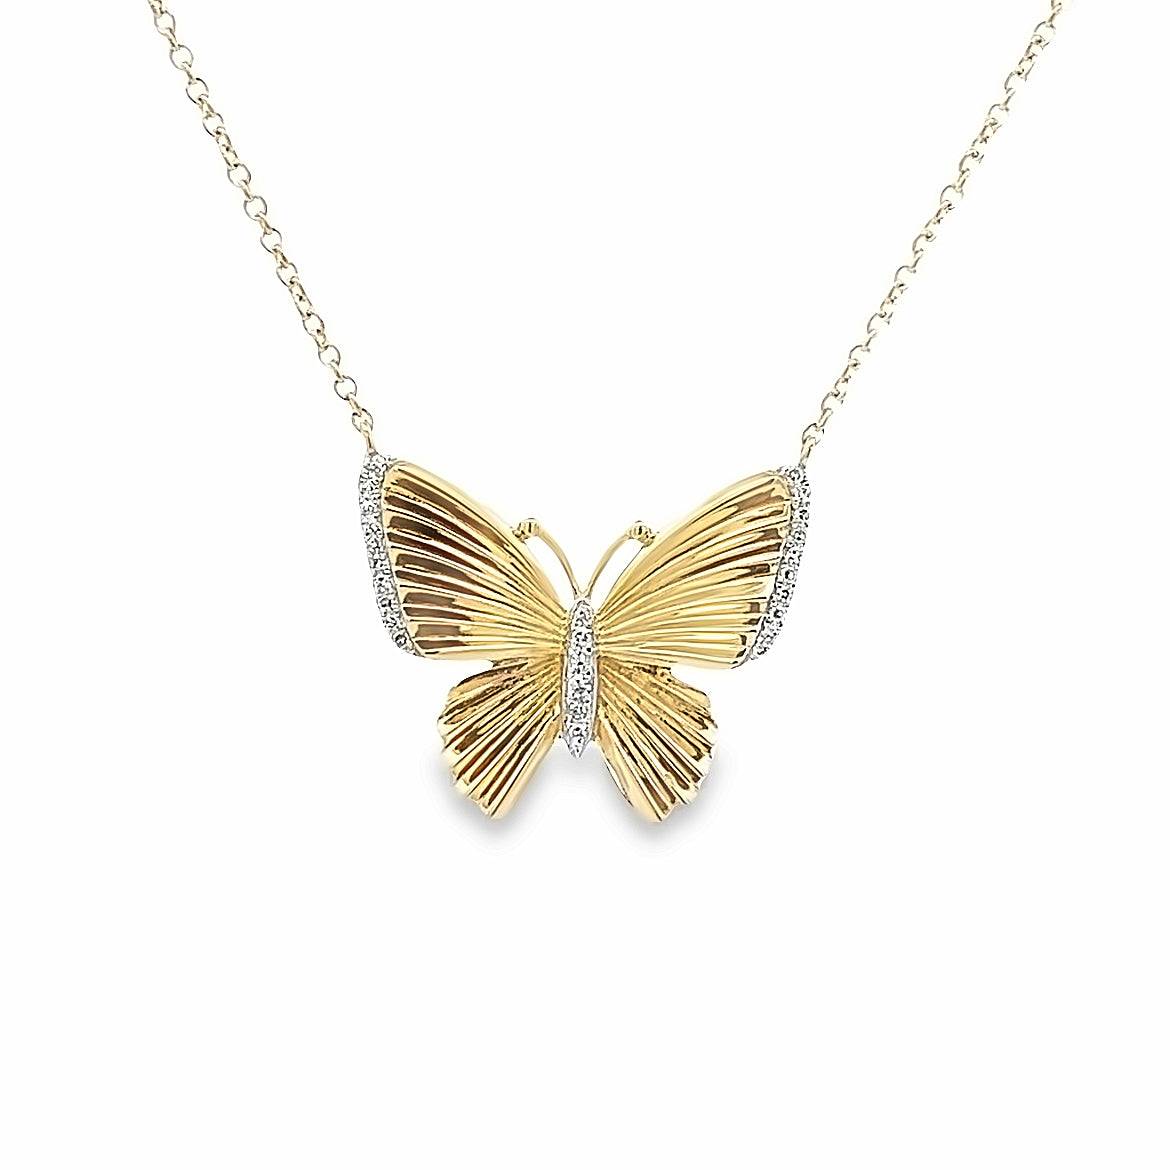 14K GOLD BICOLOR BUTTERFLY NECKLACE